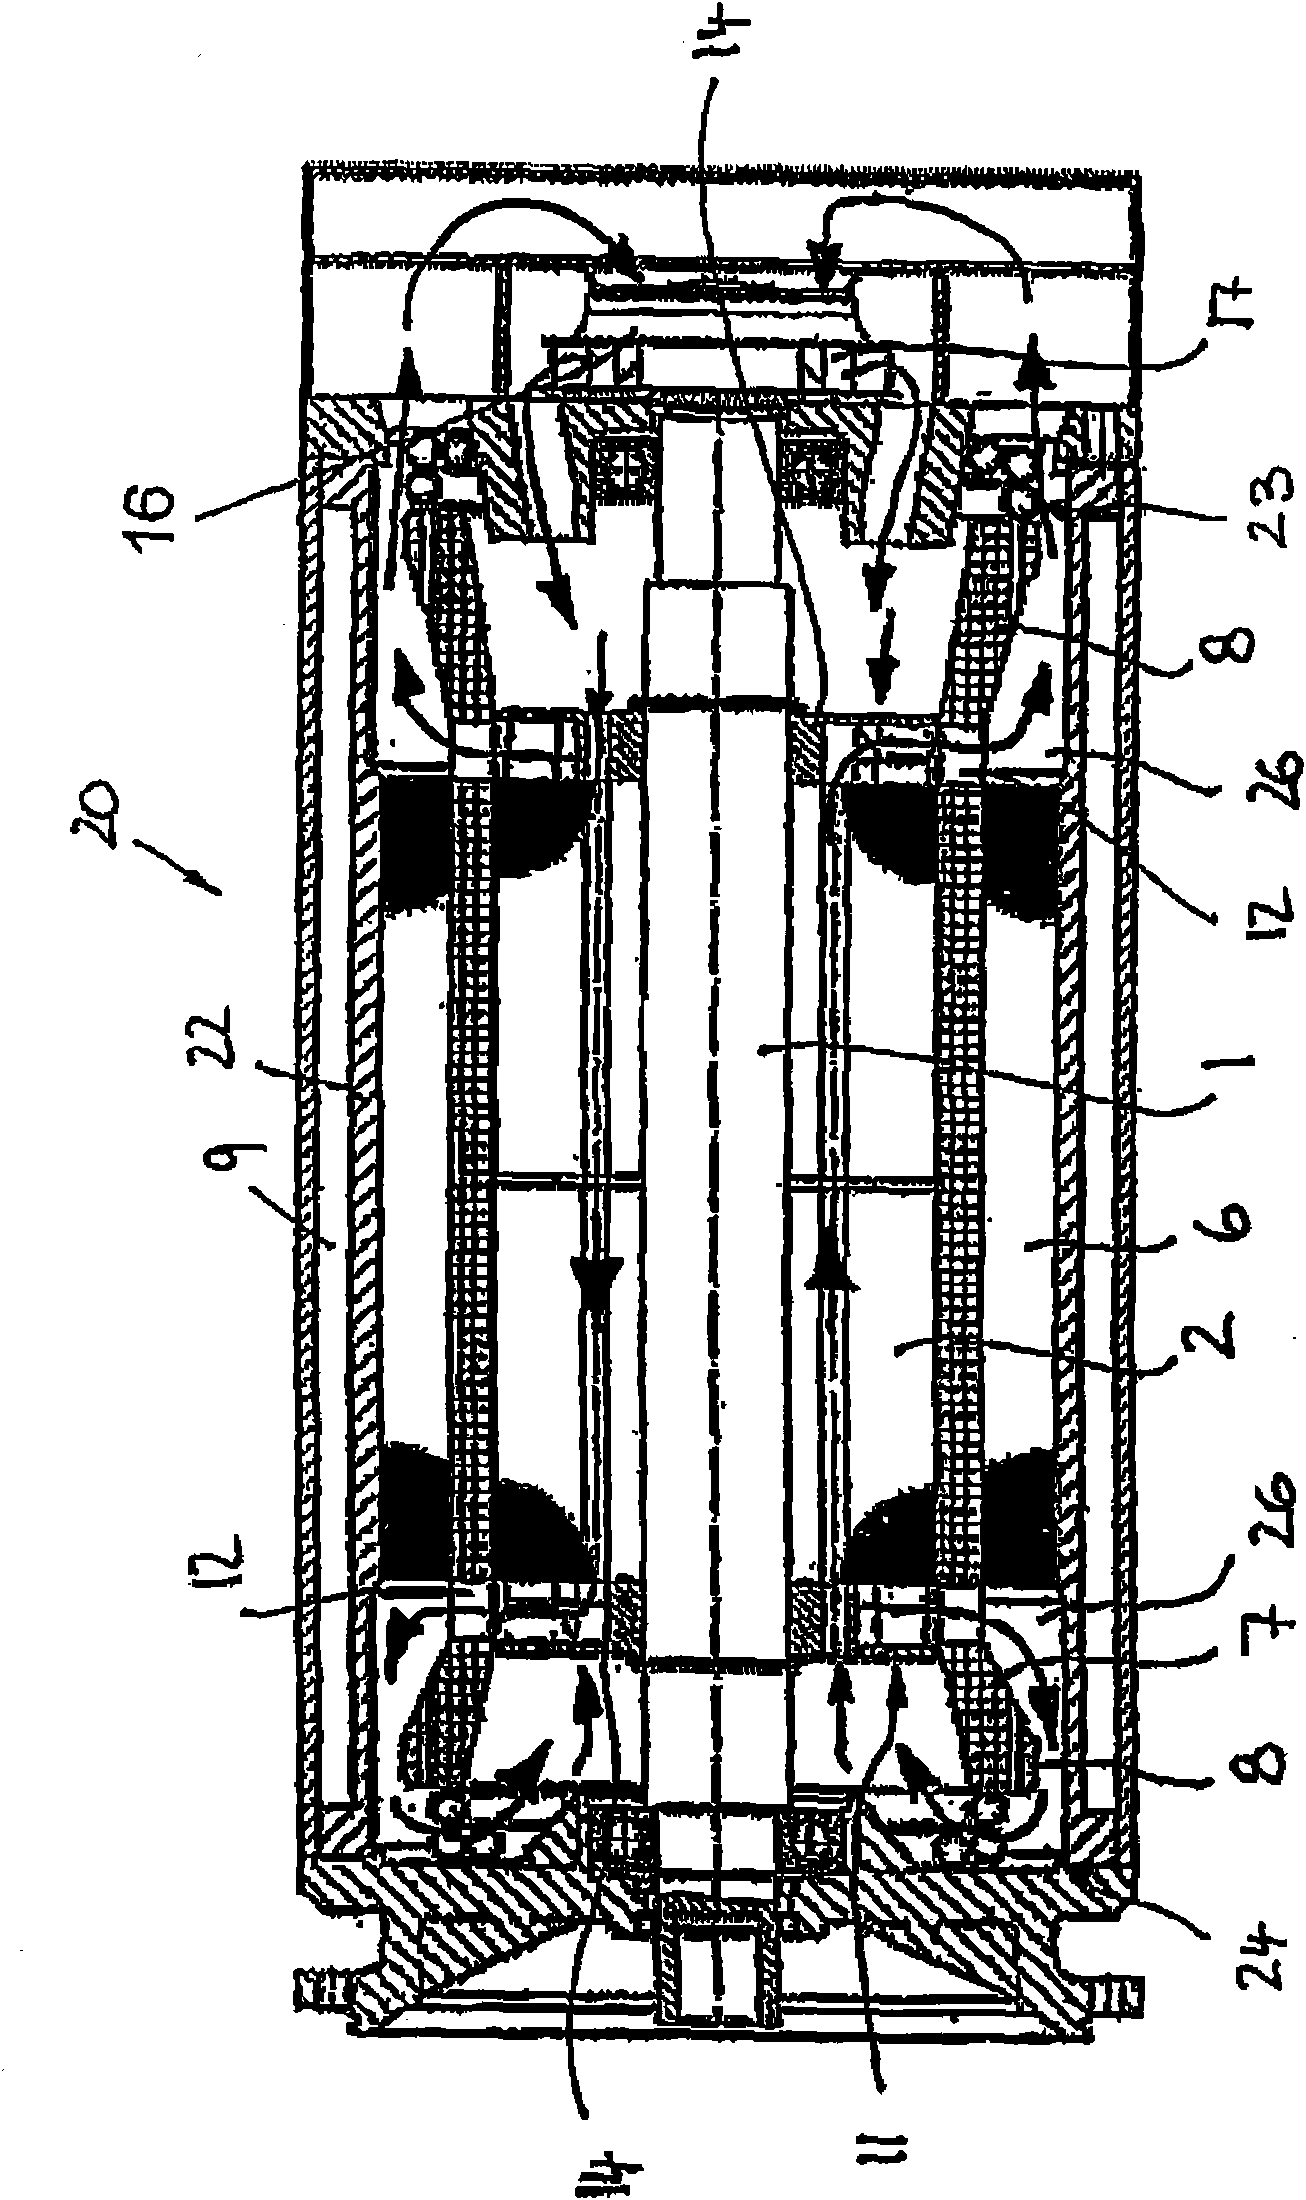 Liquid-cooled electric machine and method for cooling such electric machine